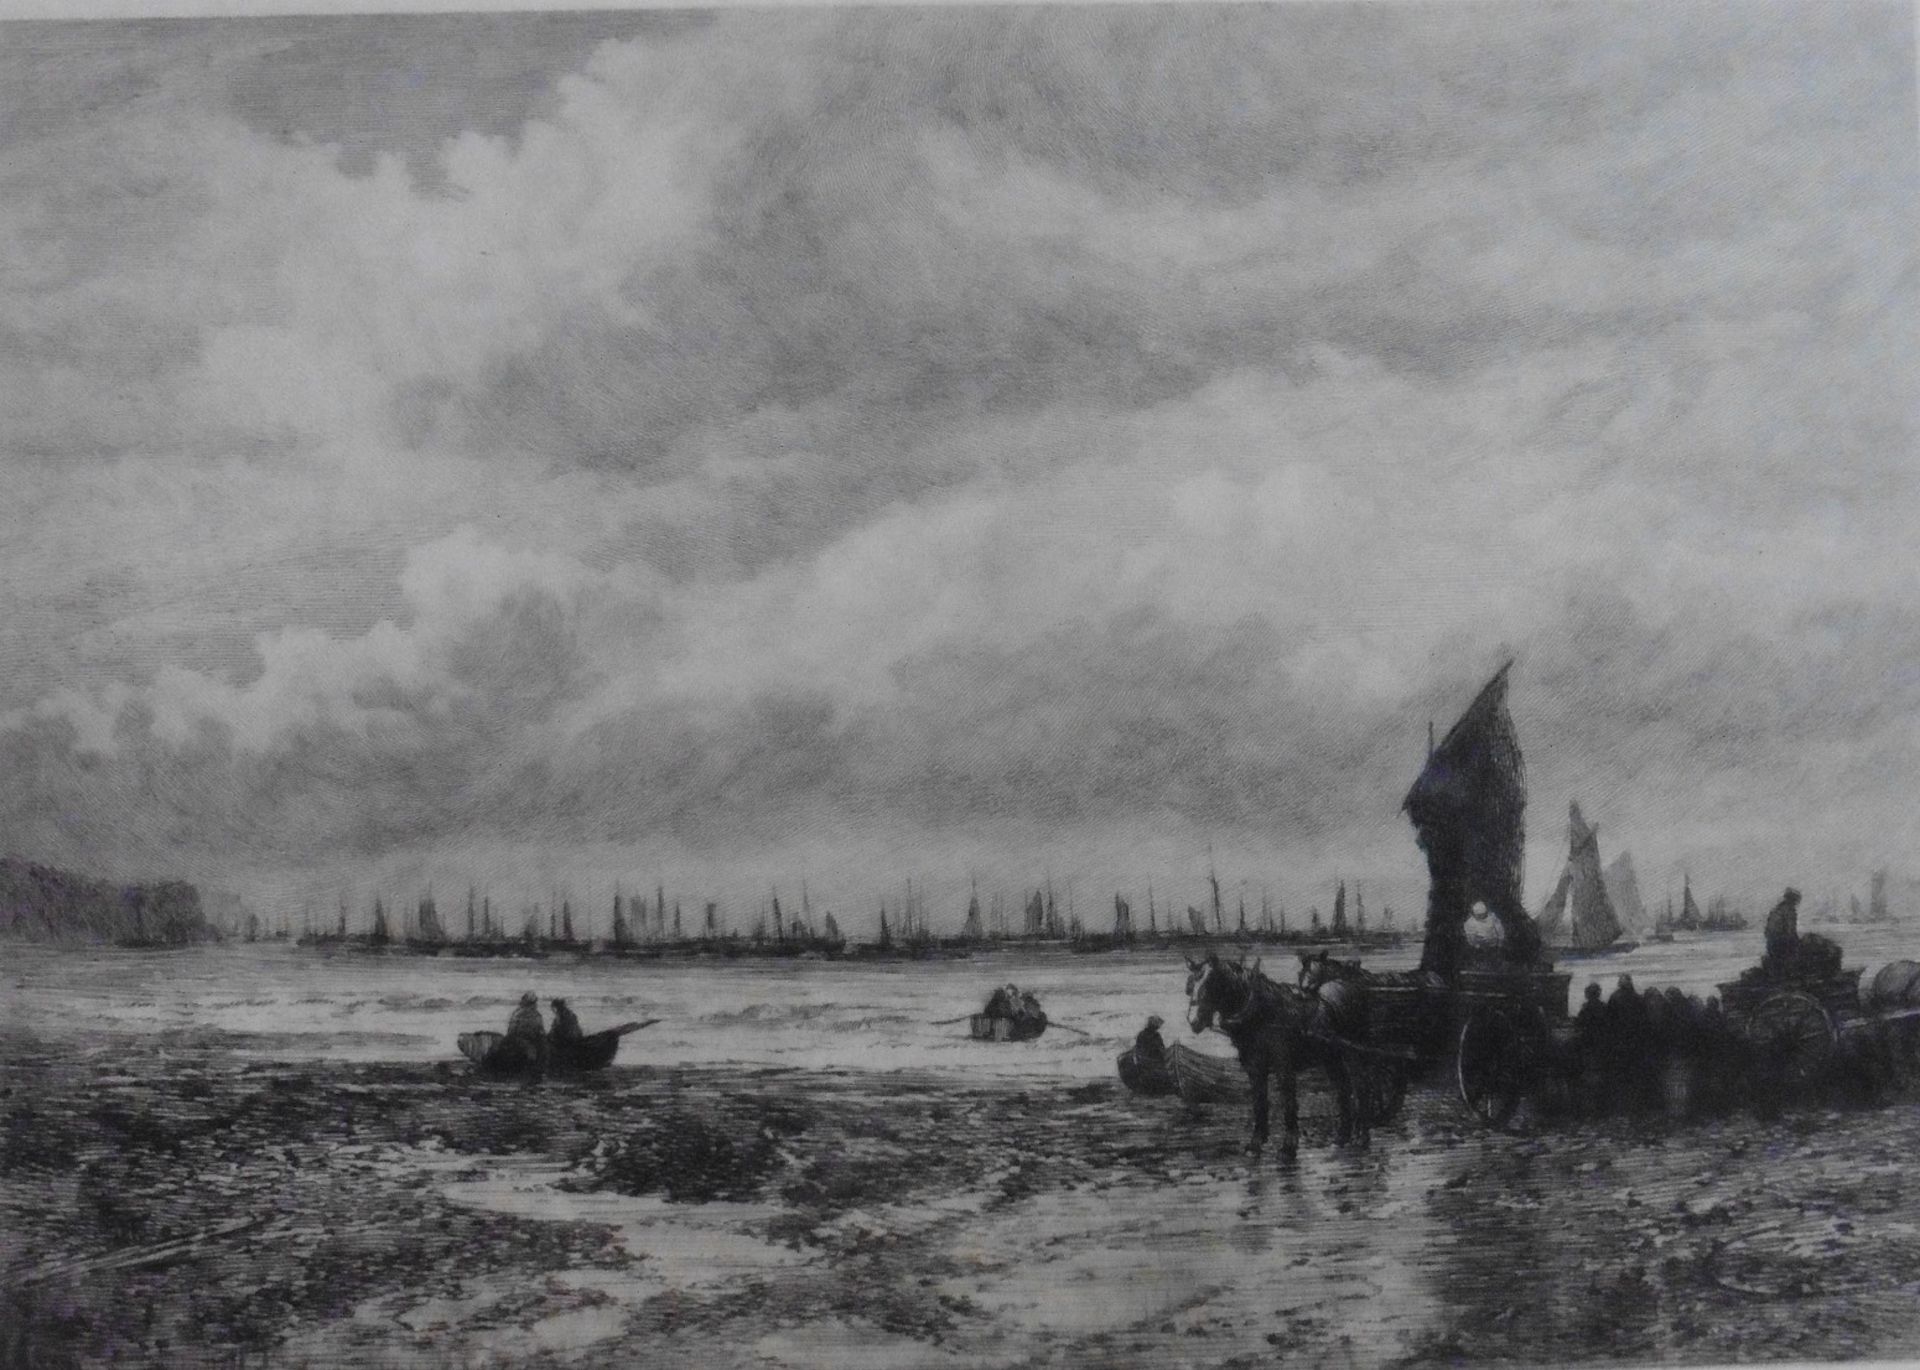 Unsigned engraving circa 1900 “Mussel collecting on the shore”